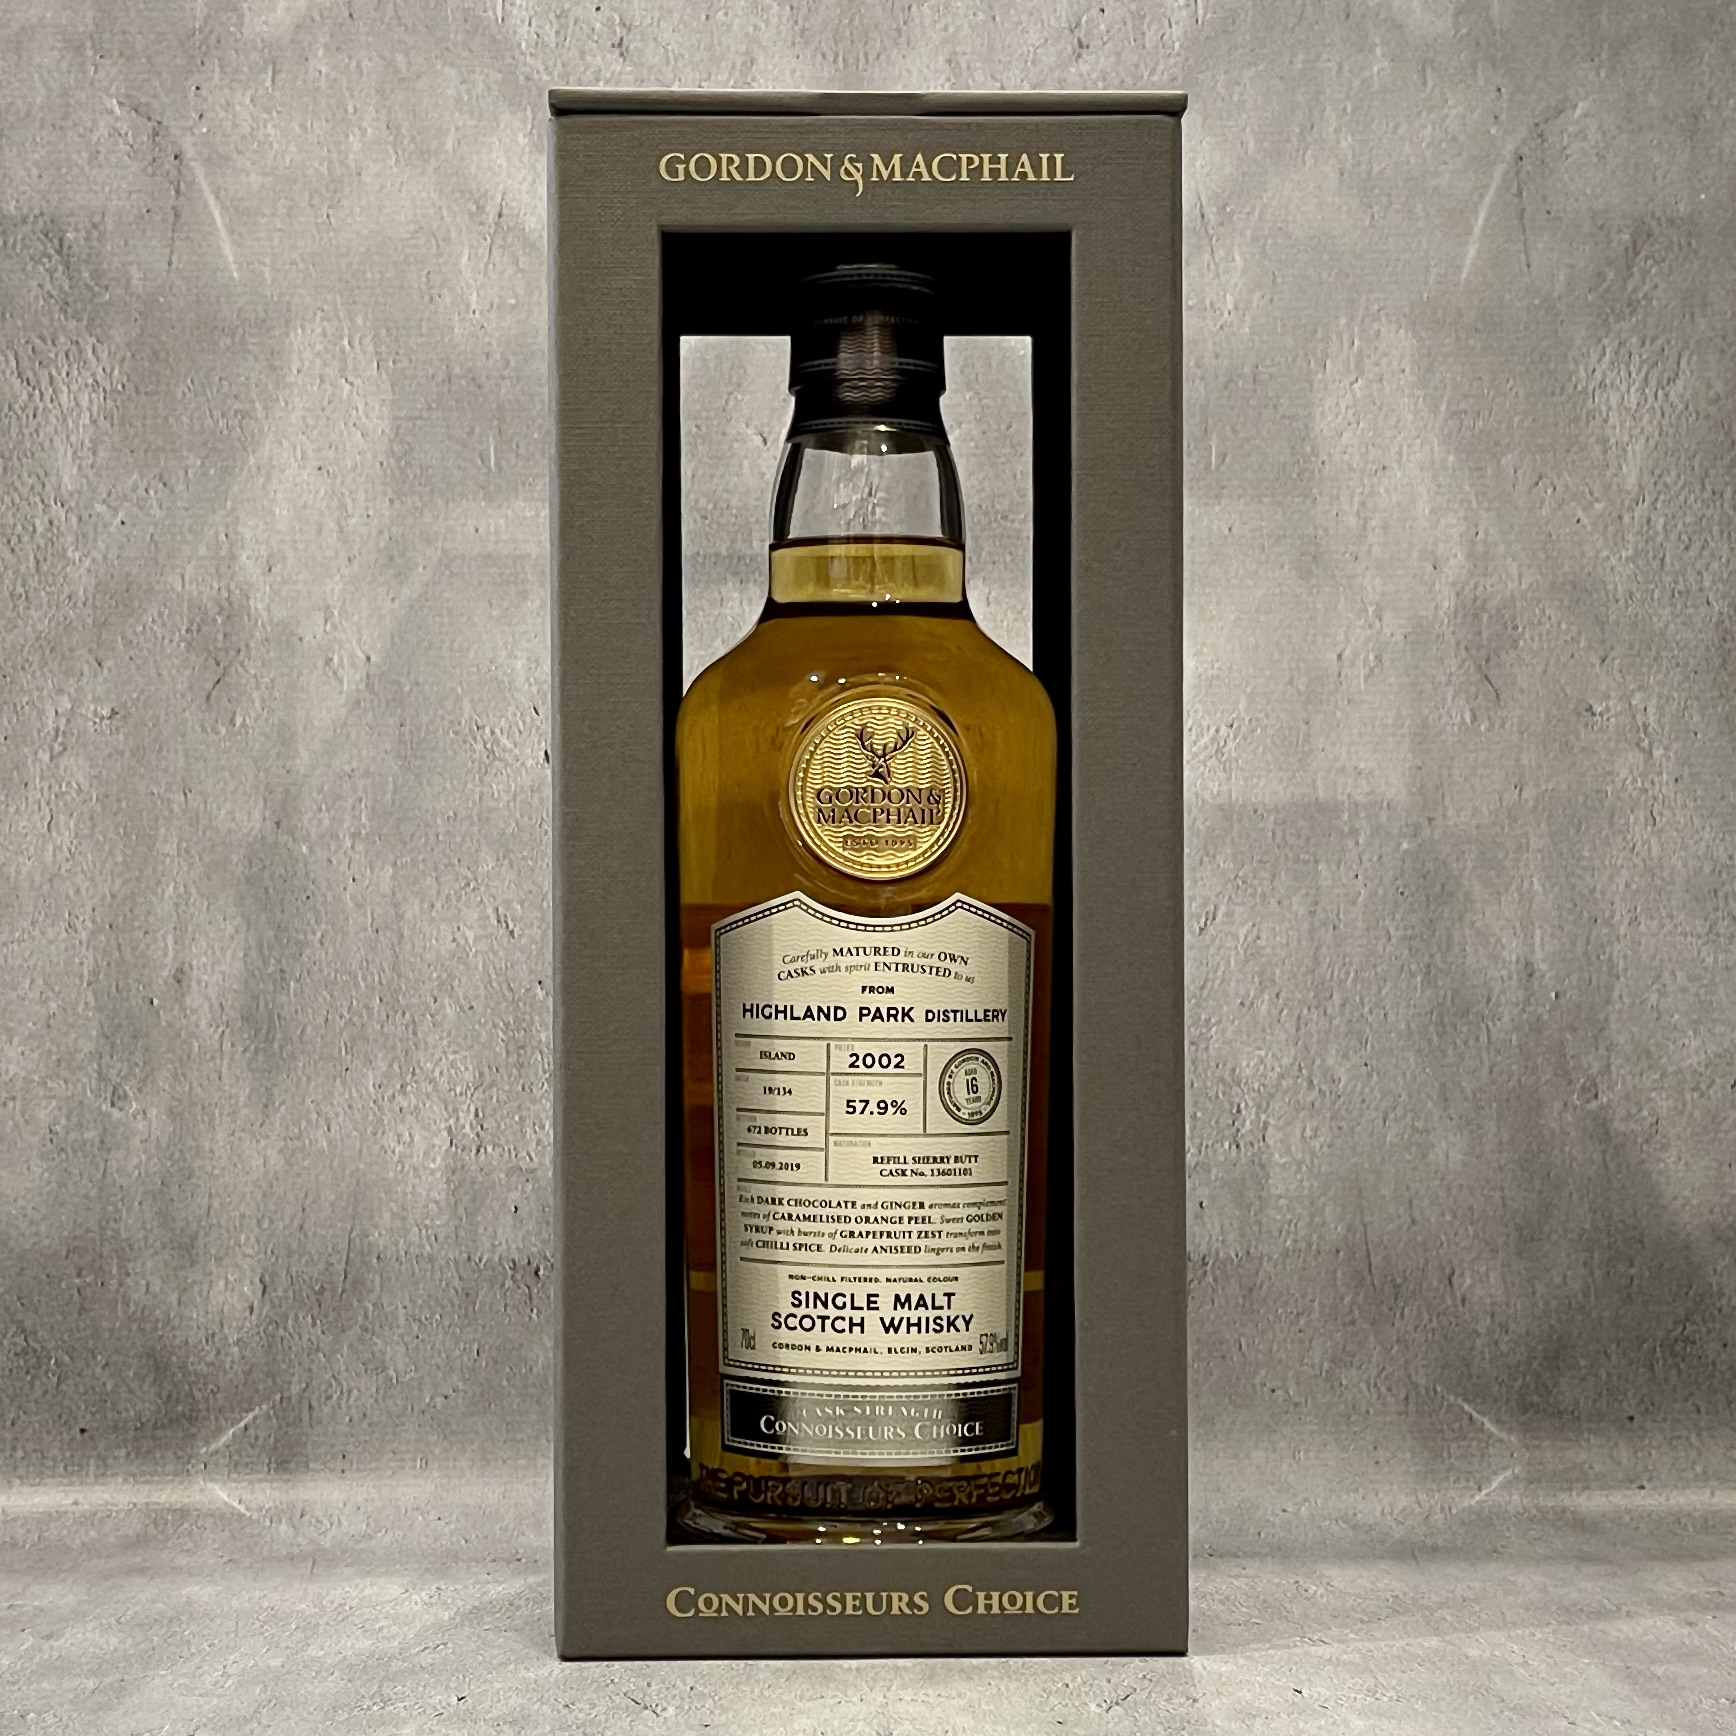 WHISKY LOVERS ONLINESHOP / ハイランドパーク2002 16年リフィル ...